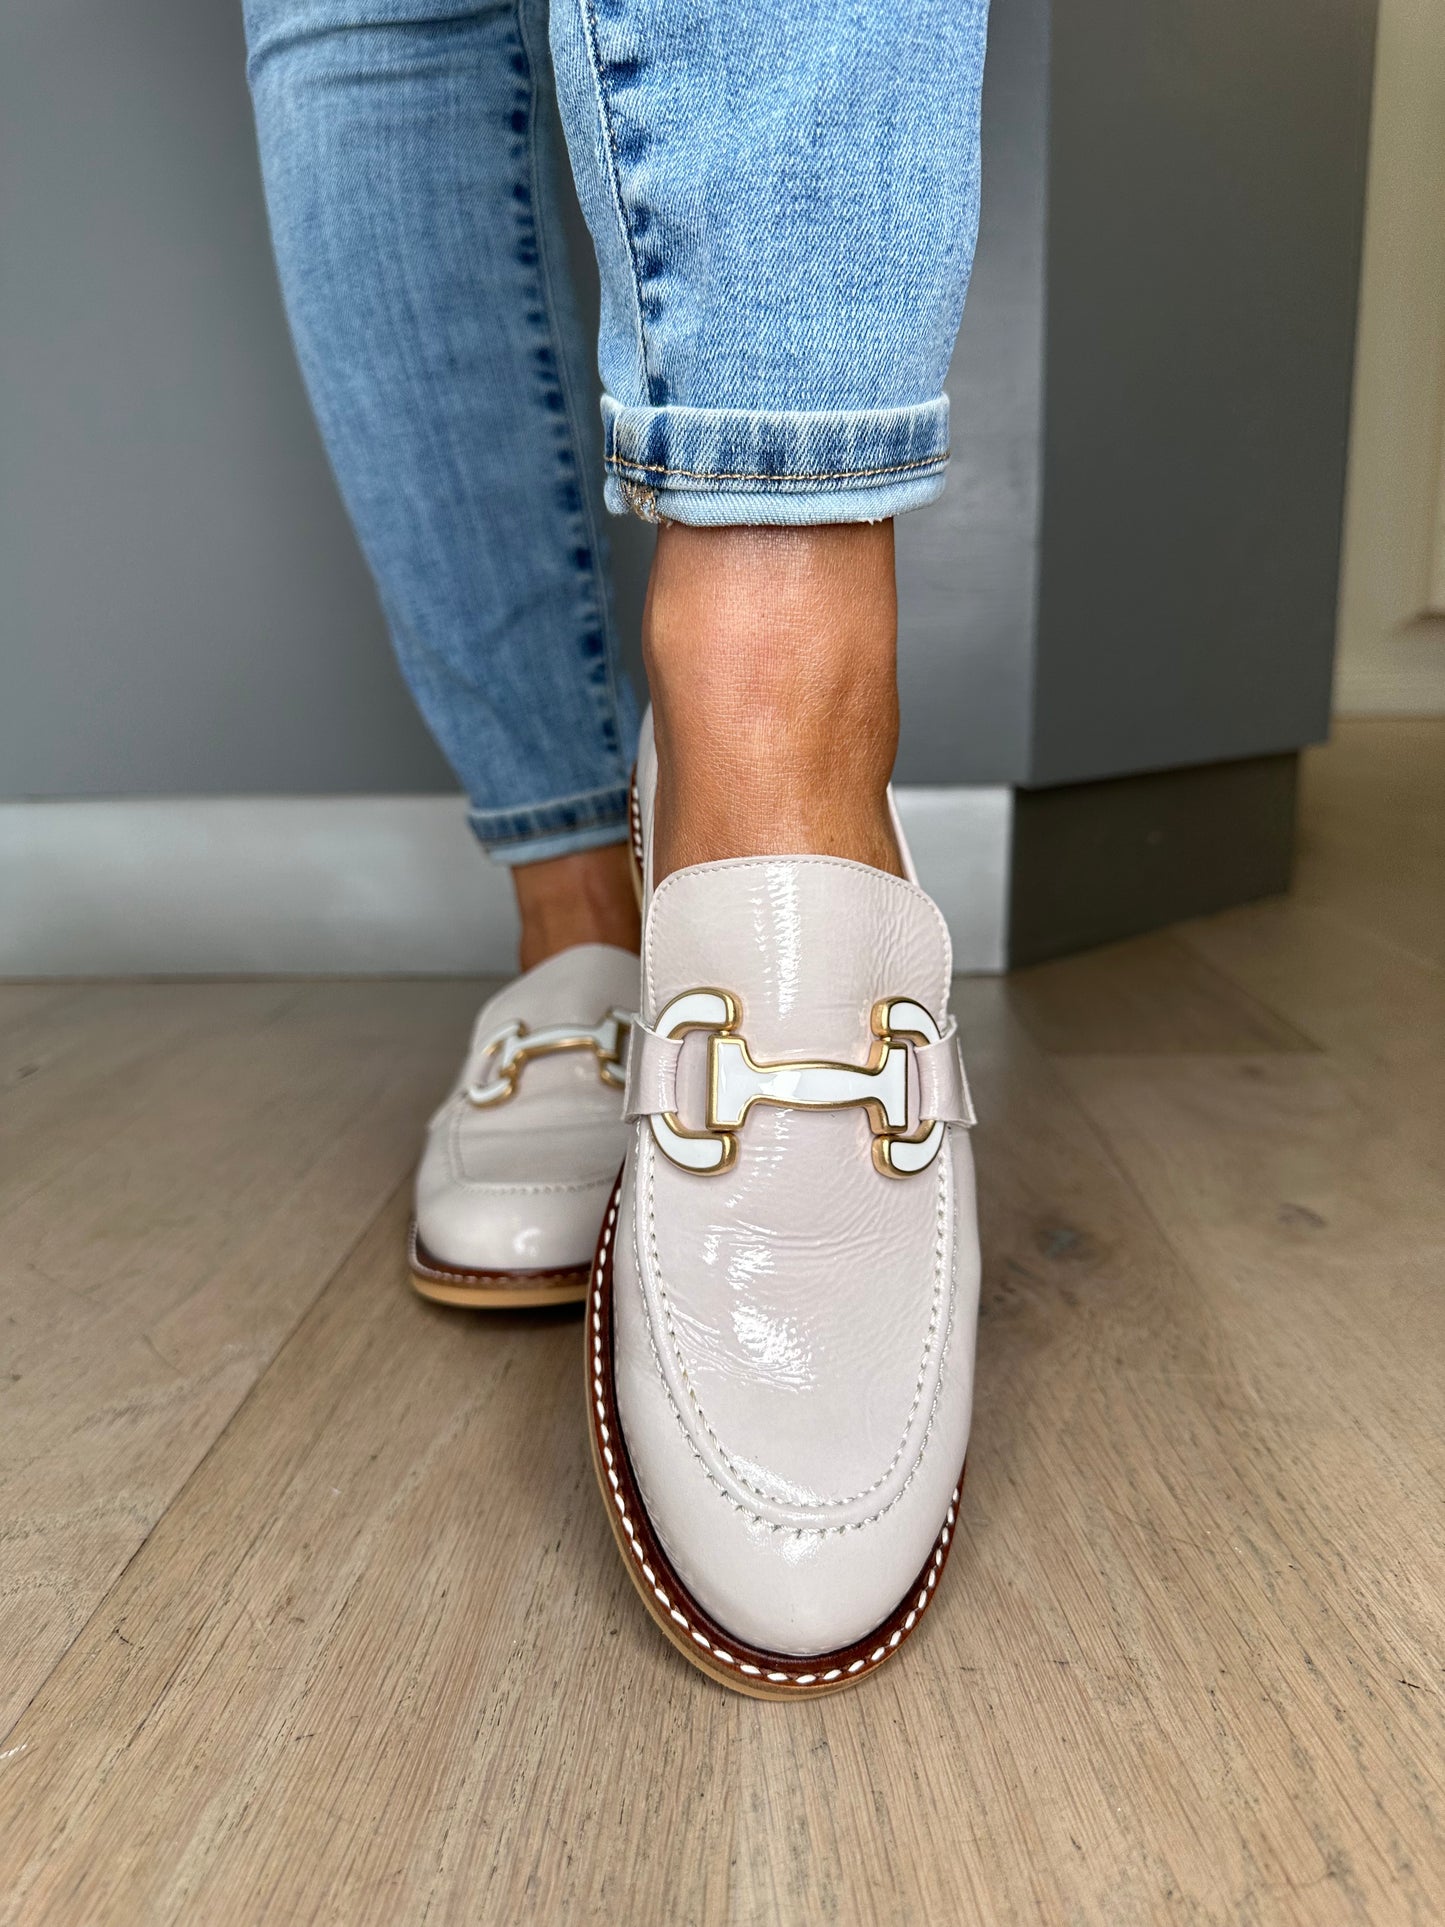 Marian - Soft Cream Nappa Leather Loafer With Chain Trim